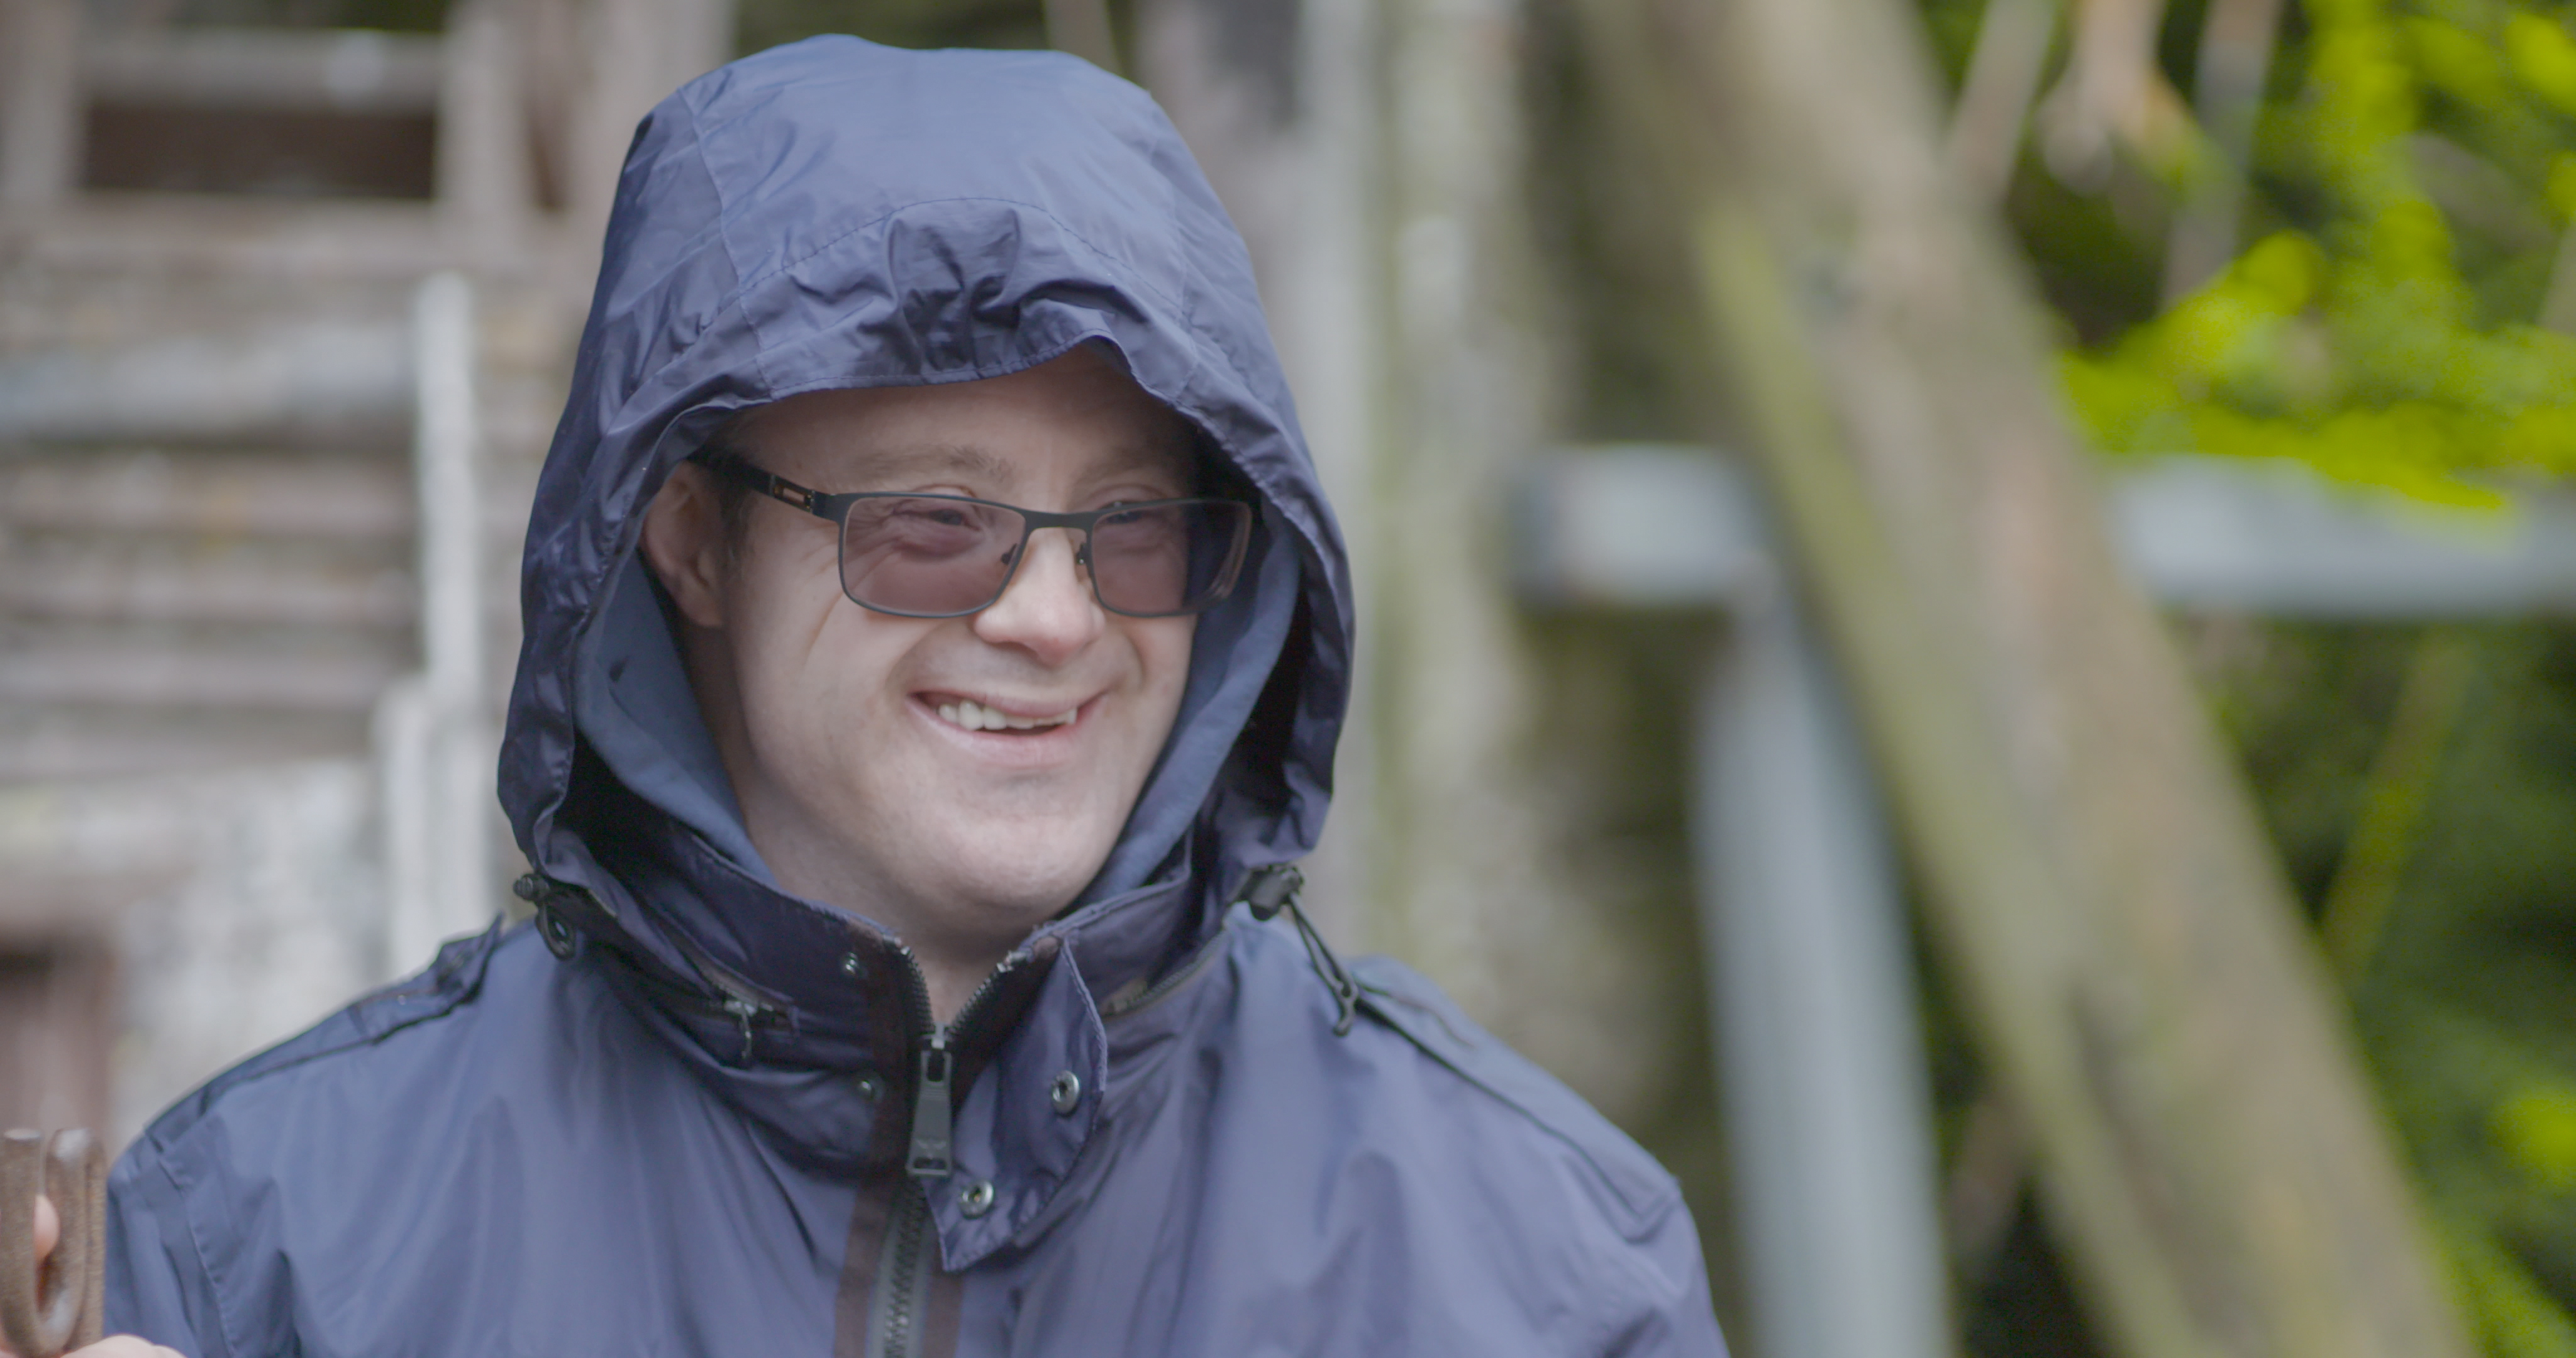 A smiling Hijinx actor wearing glasses and a blue hooded coat stands in front of a blurred background of a wooden structure and green branches.